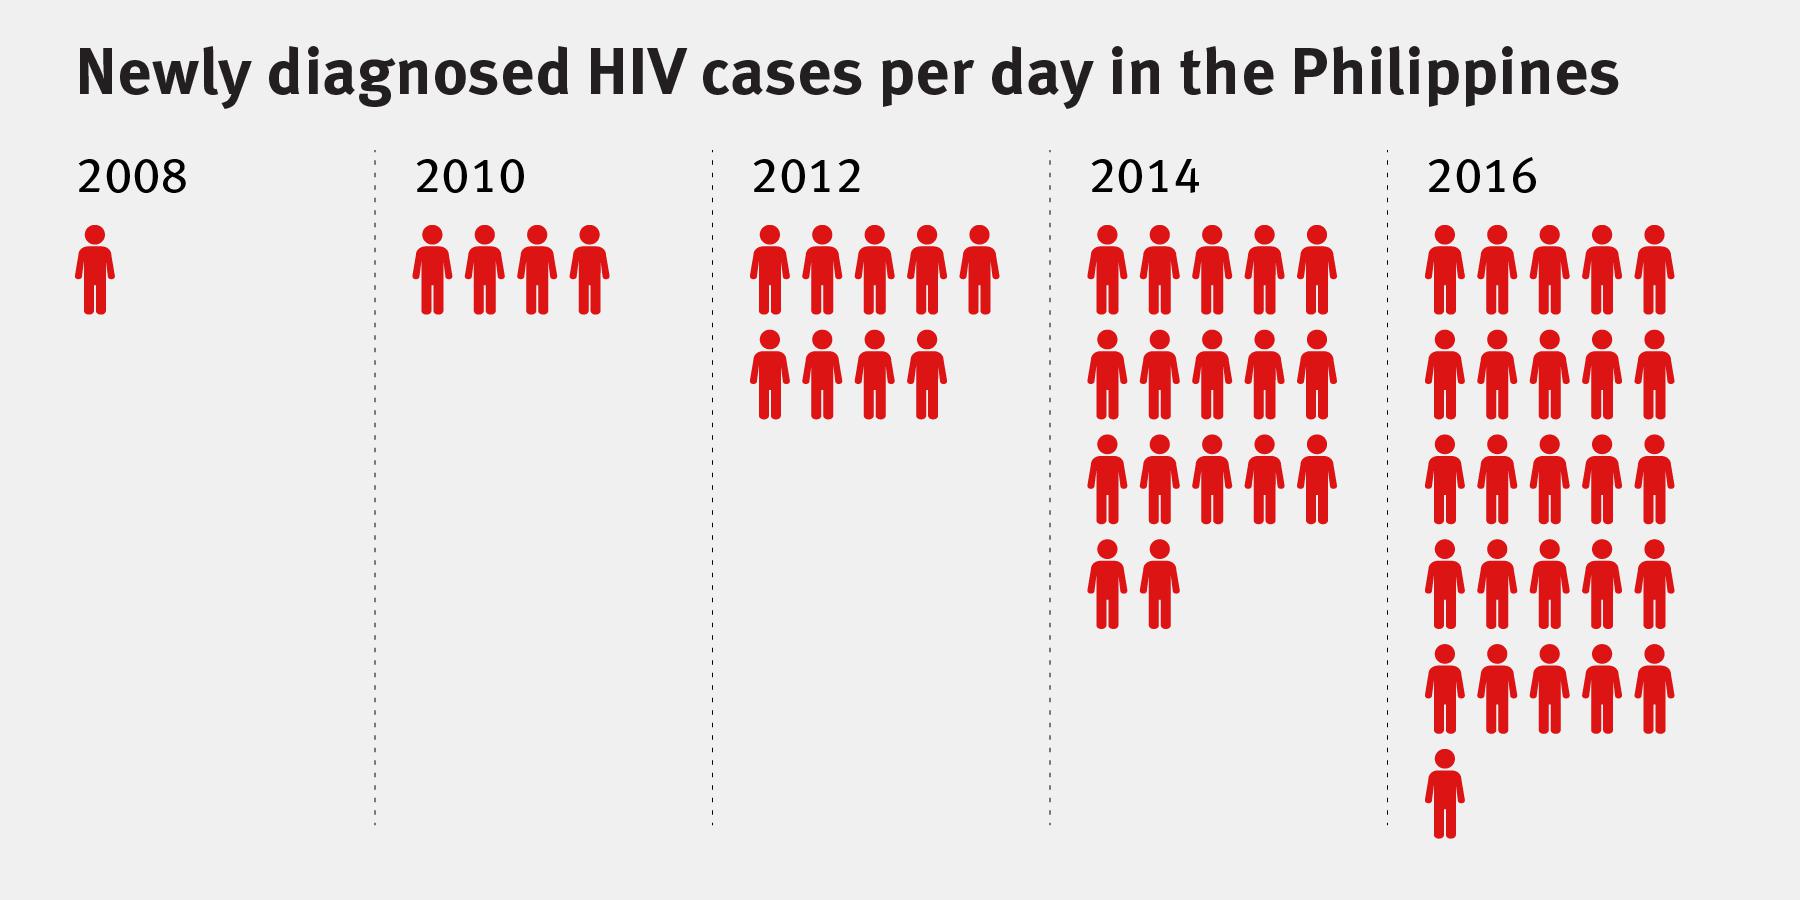 Chart for the Philippines Report showing newly diagnosed HIV cases per day from 2008 to 2016.